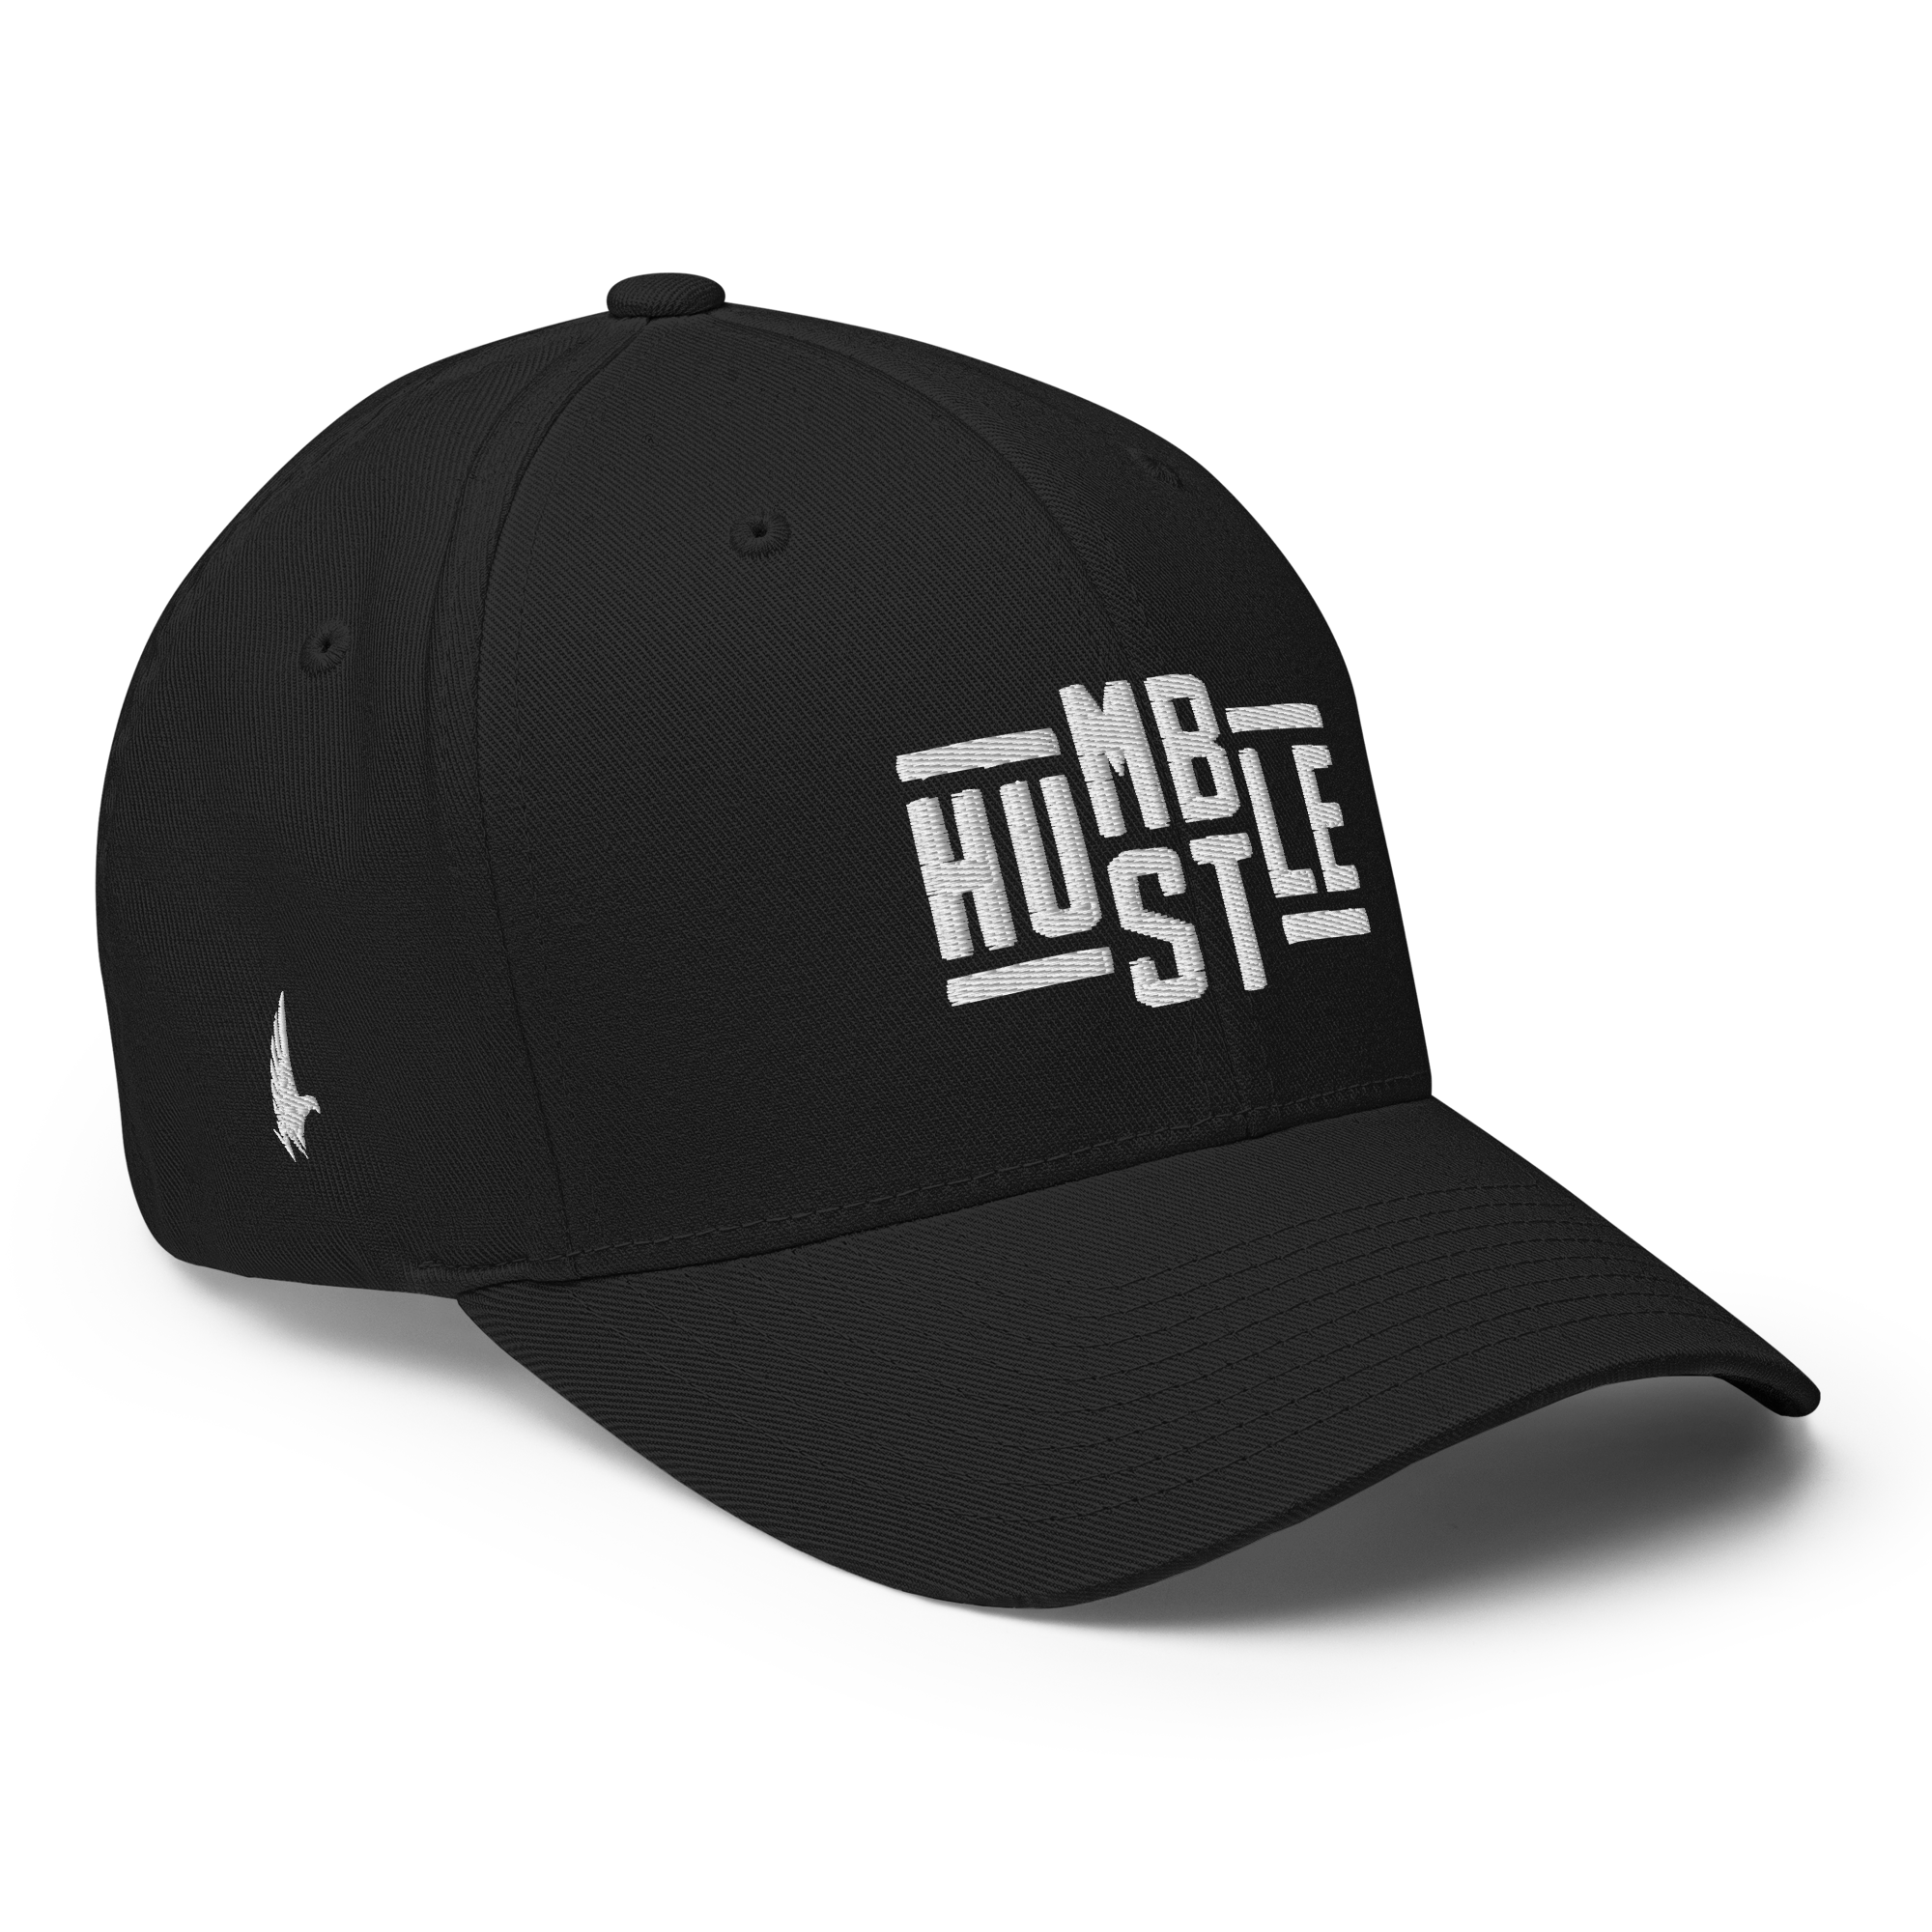 Loyalty Vibes Hustle Fitted Hat - Black Fitted - Loyalty Vibes